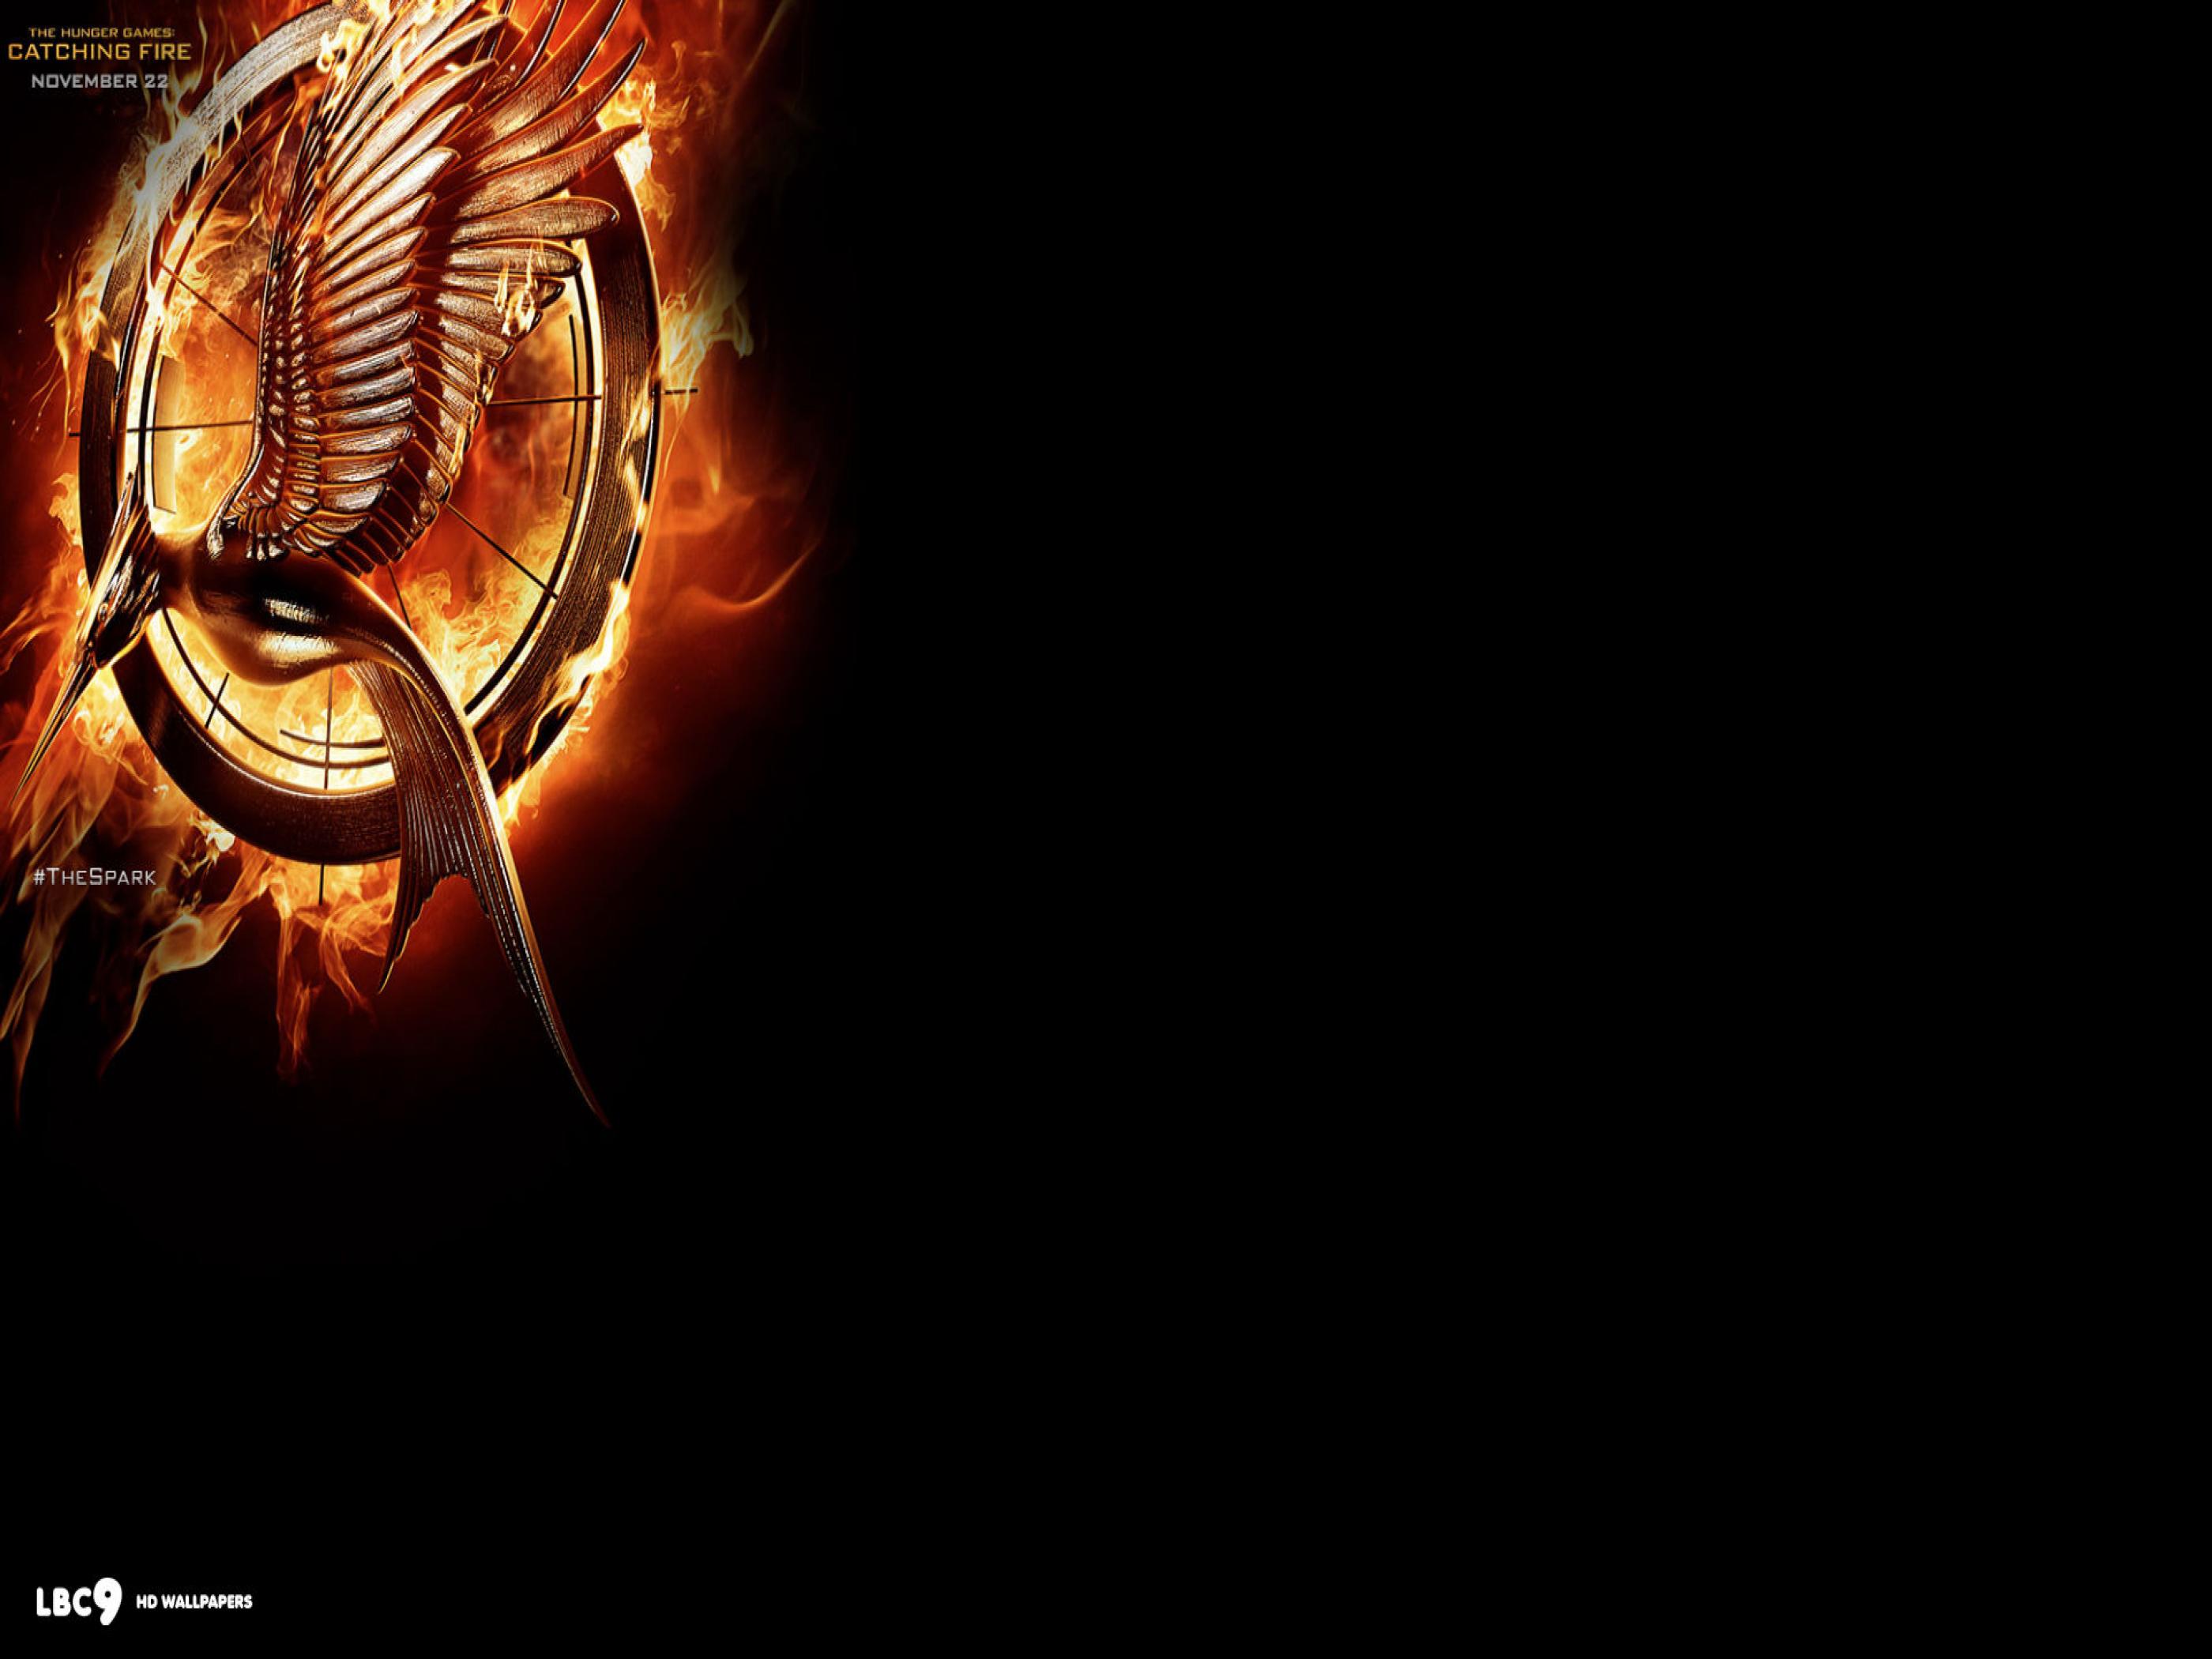 Hunger Games Wallpaper For Computer - Hunger Games Catching Fire Background - HD Wallpaper 